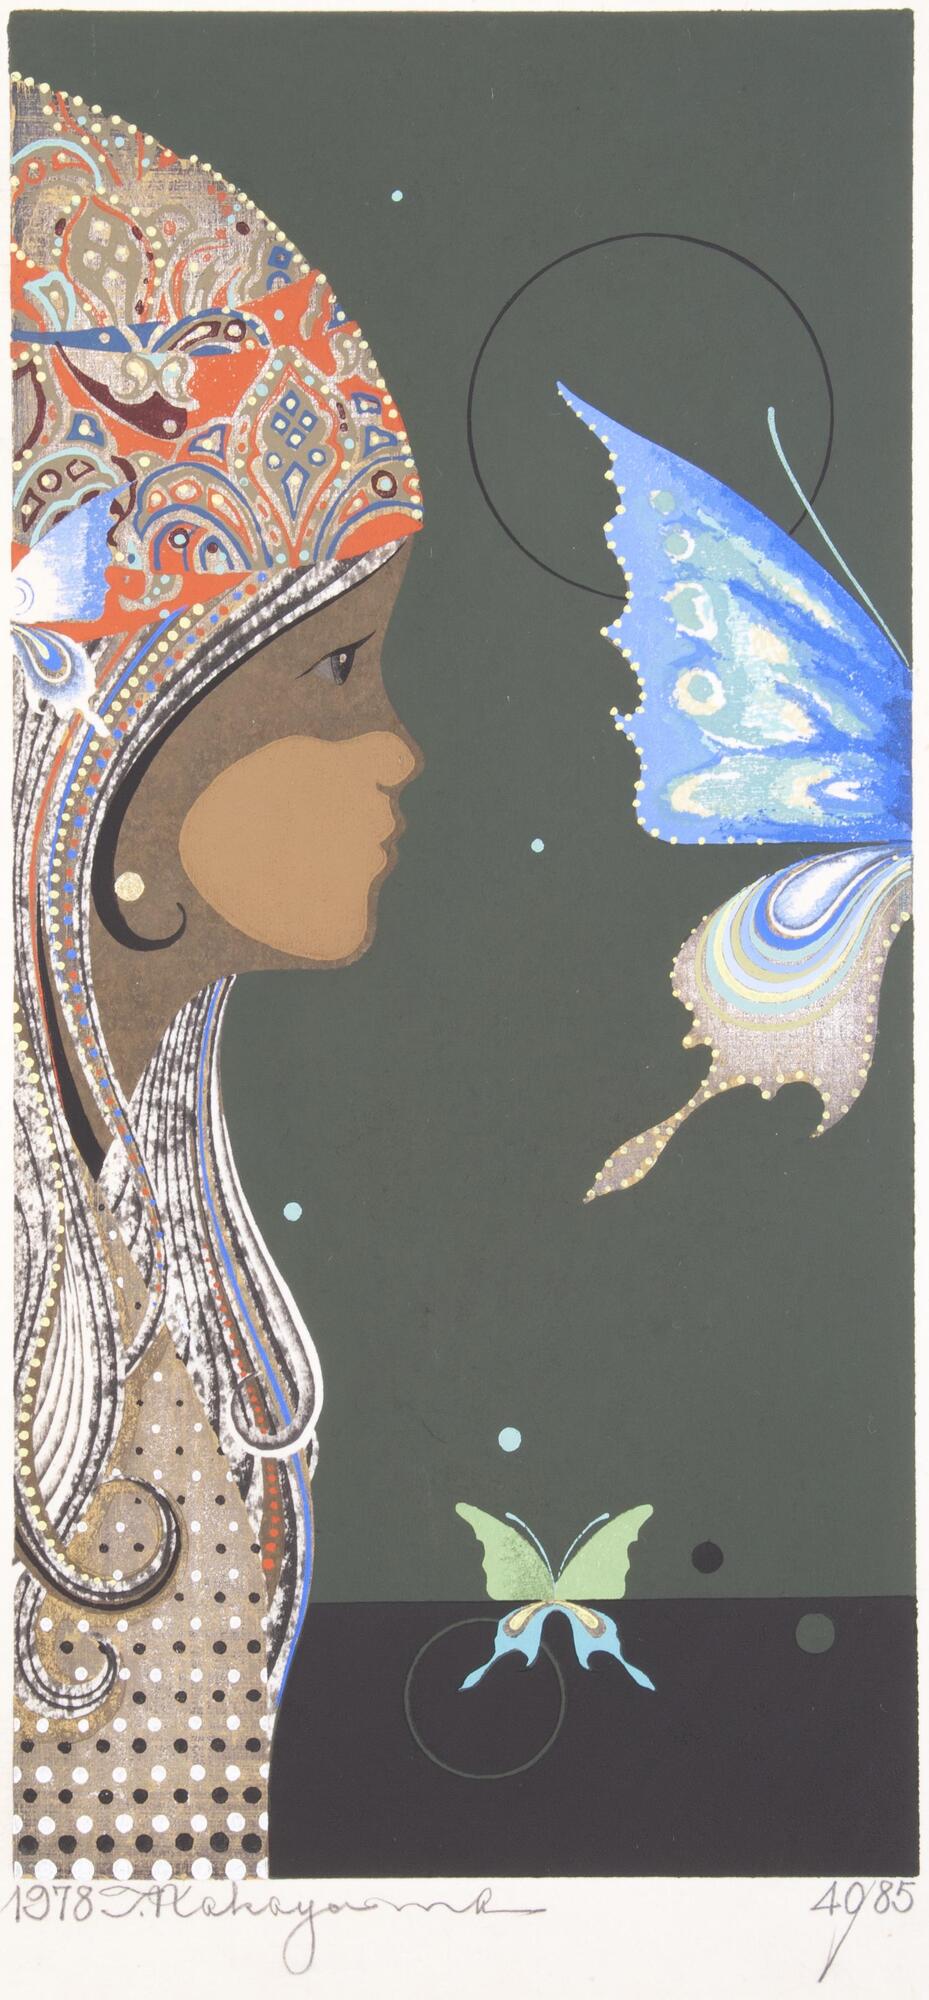 A girl with her head and body in profile and she is&nbsp;looking at a half blue and half white butterfly. Her hair is decorated with abstract designs and her shirt is tan with rows of white and brown dots. There is a smaller green and blue butterfly toward the bottom of the print.